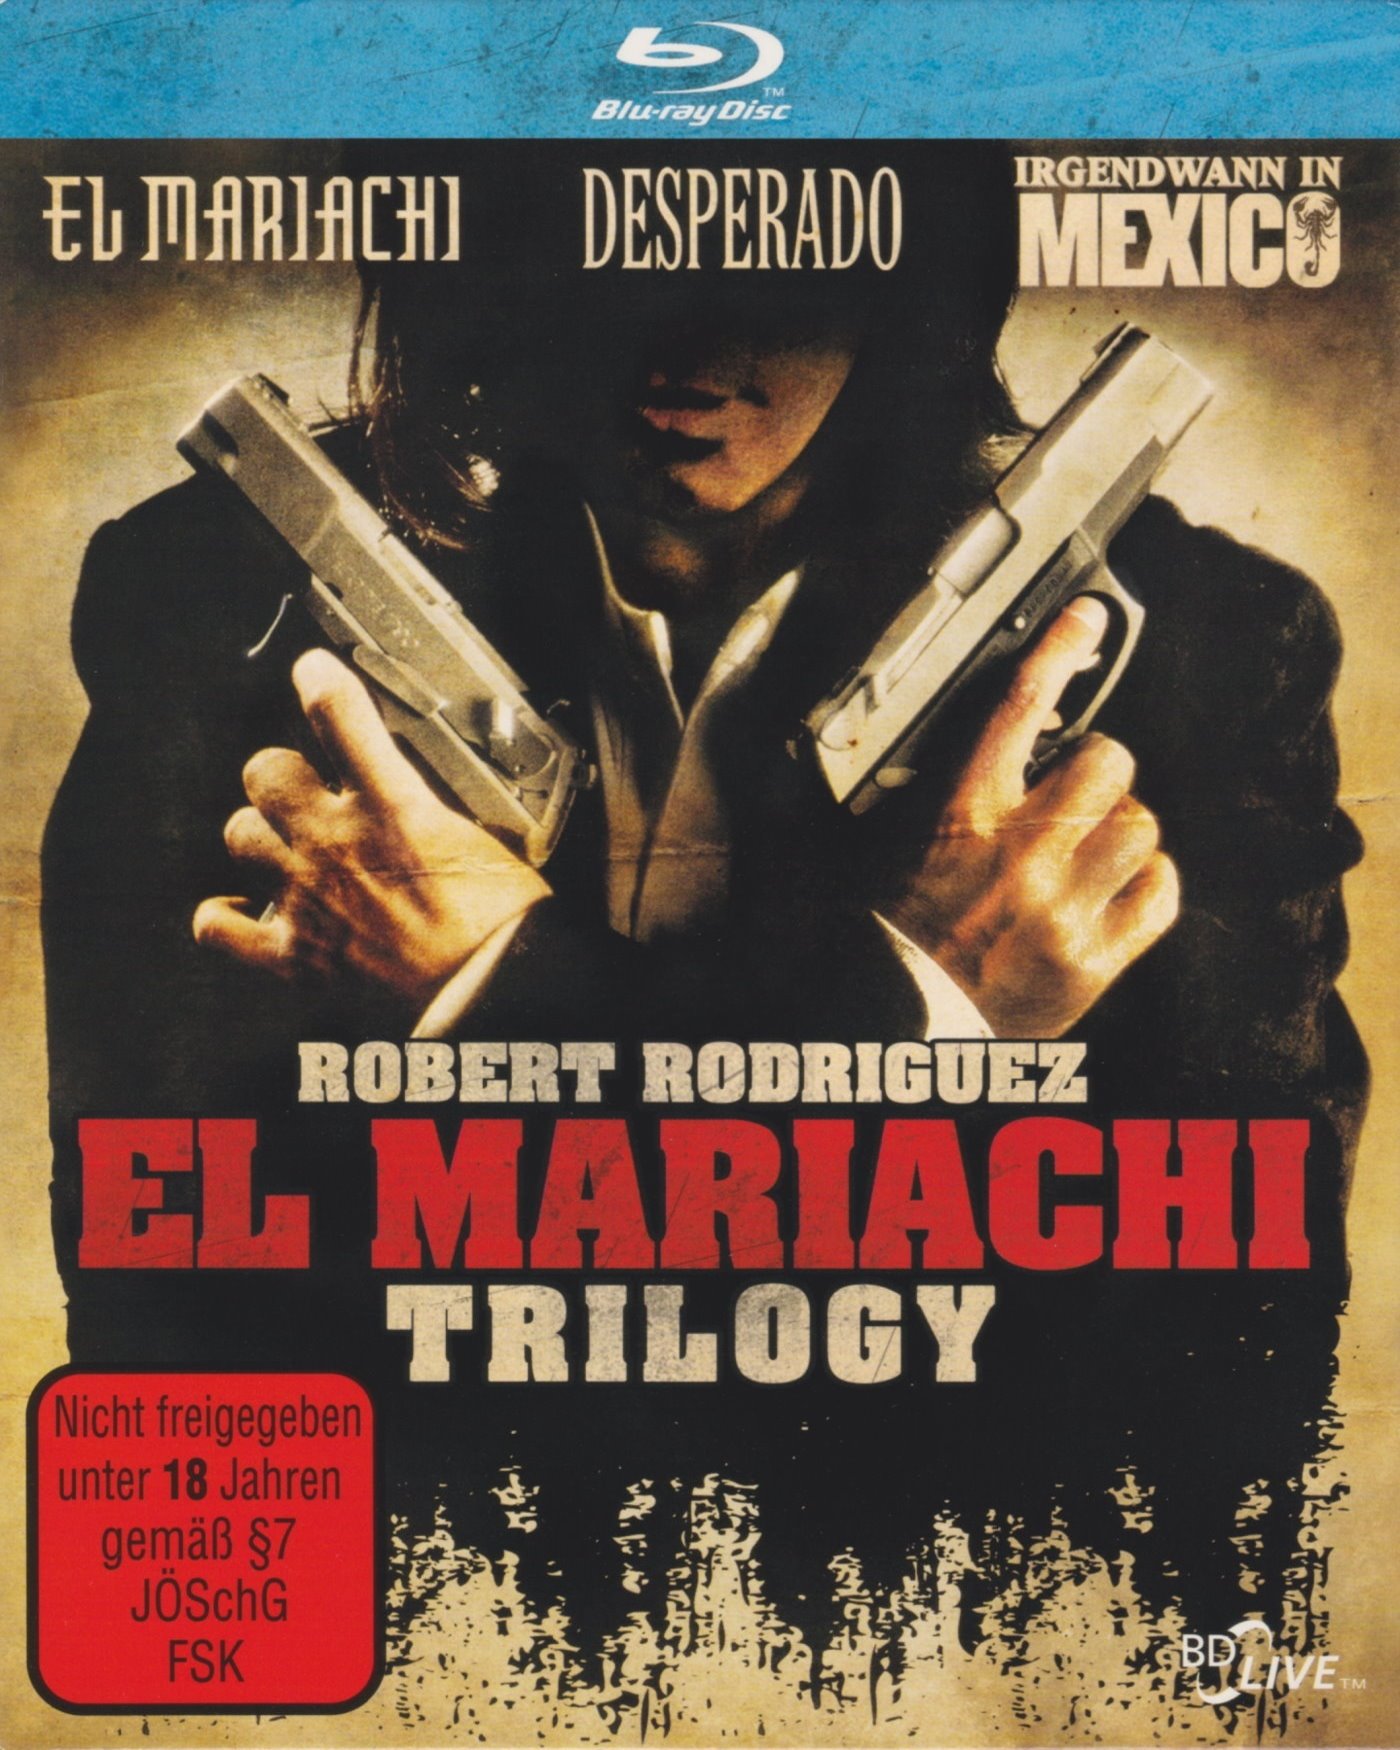 Cover - Irgendwann in Mexico.jpg